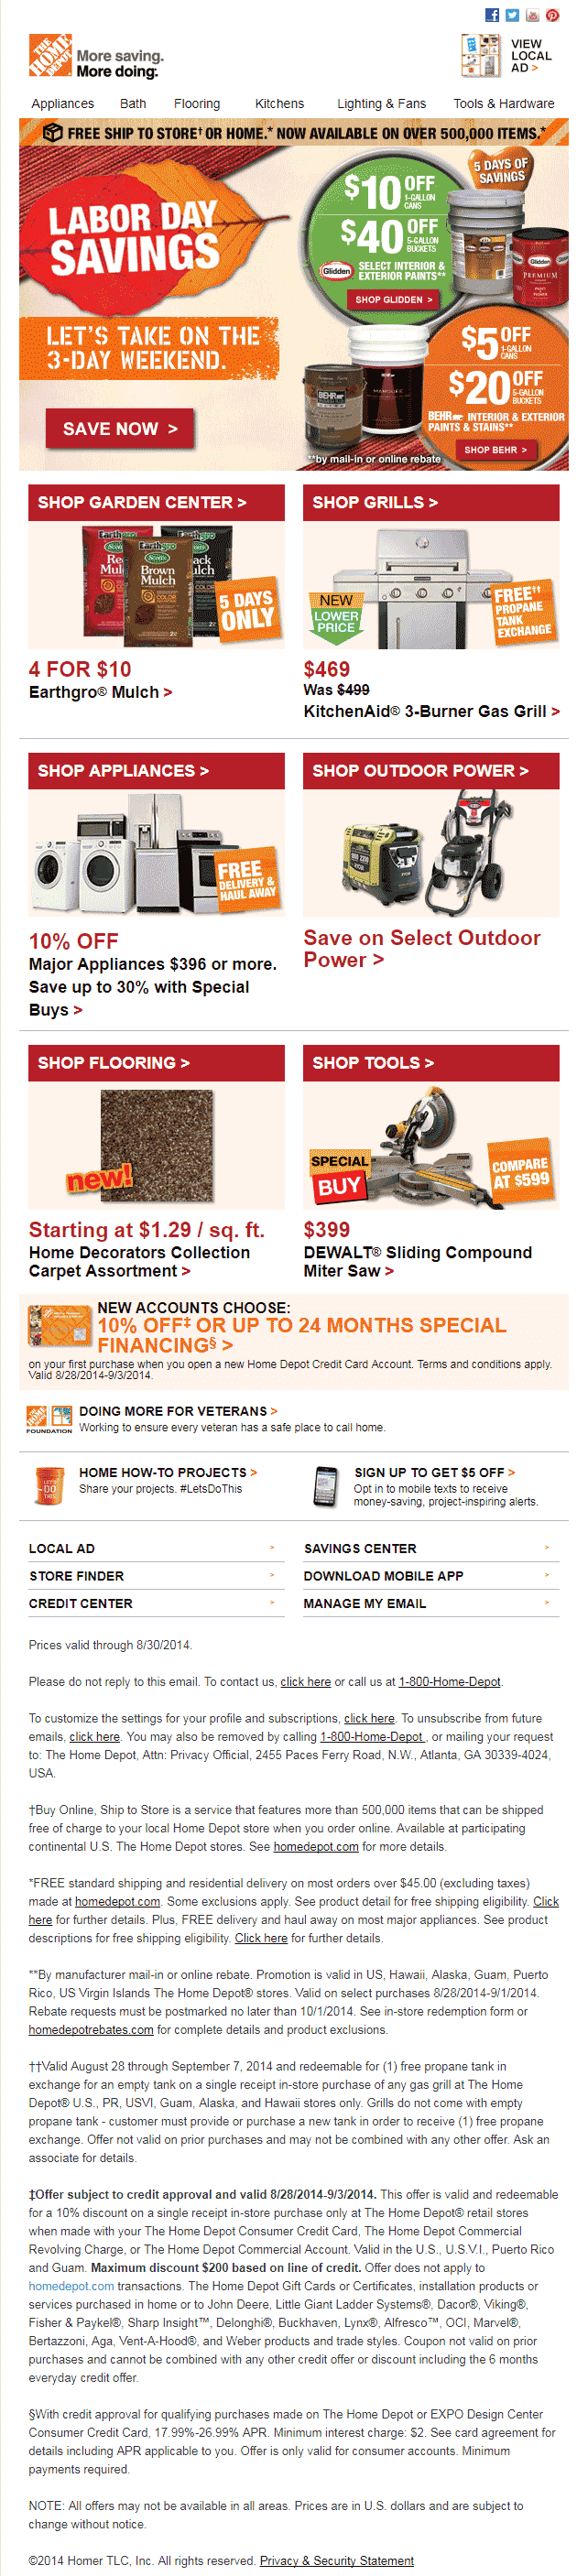 Home-Depot email template